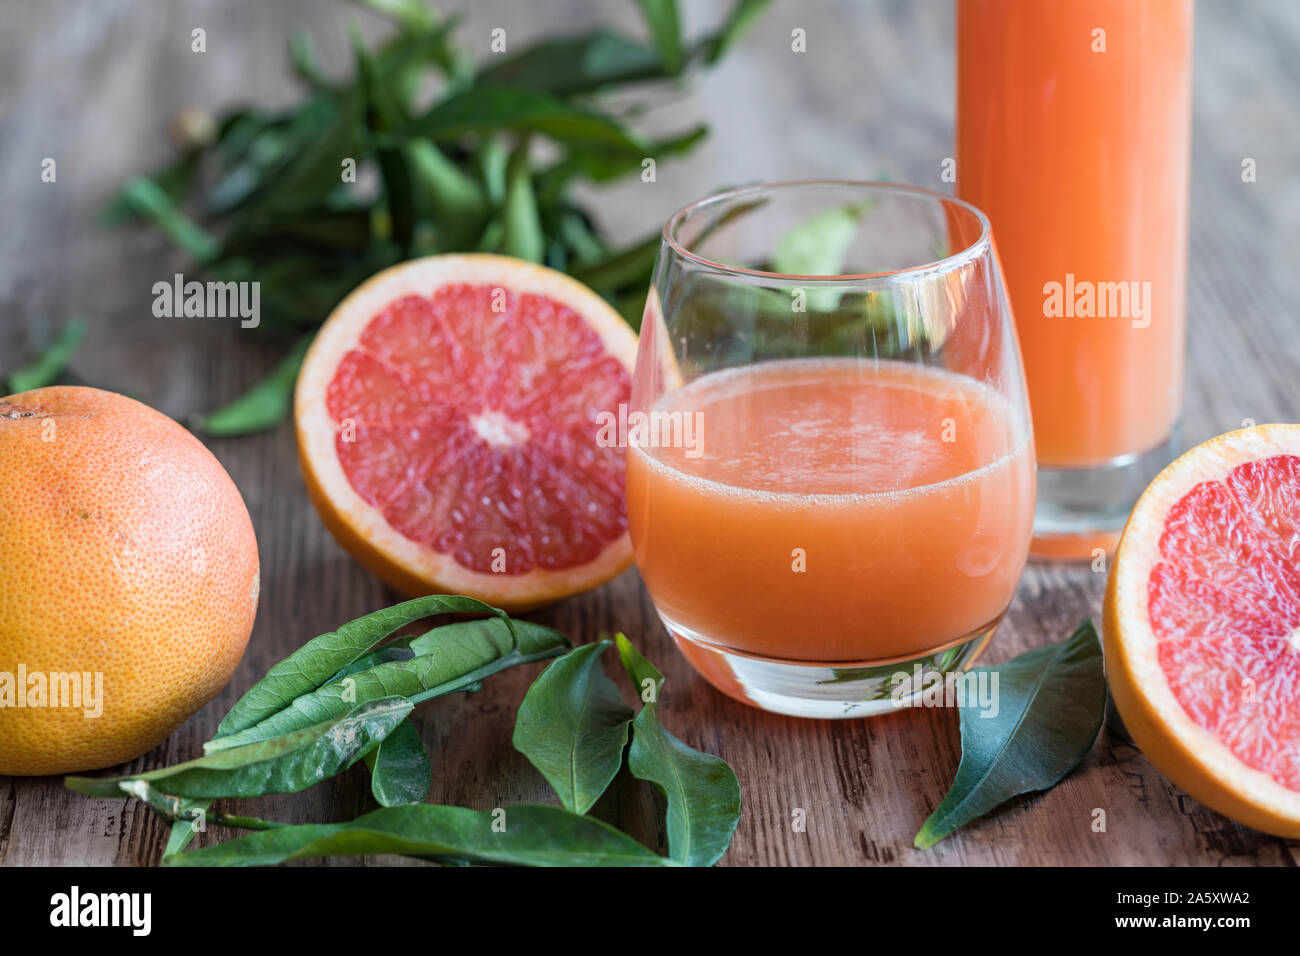 A glass of fresh, healthy organic grapefruit juice on a wooden table. There is a bottle of the grapefruit juice in the background. A halved pink grape Stock Photo